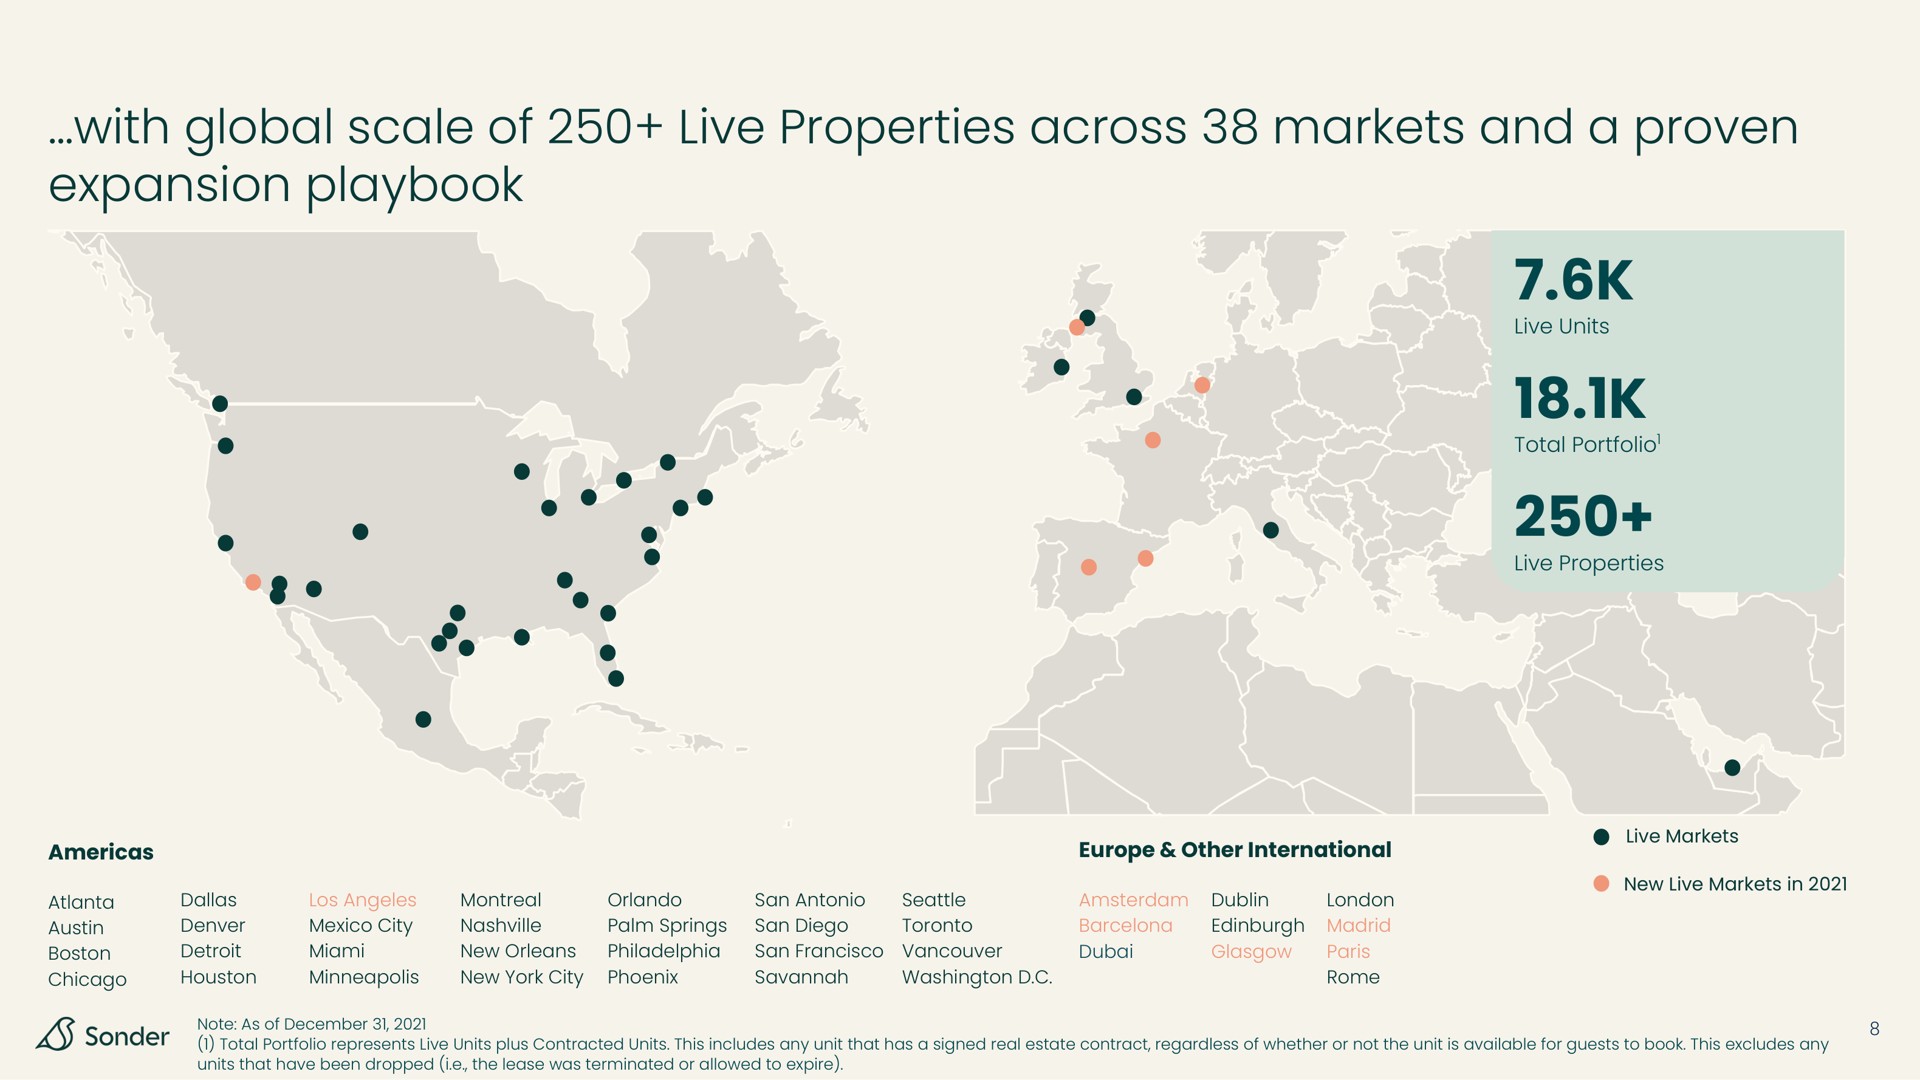 with global scale of live properties across markets and a proven expansion playbook | Sonder